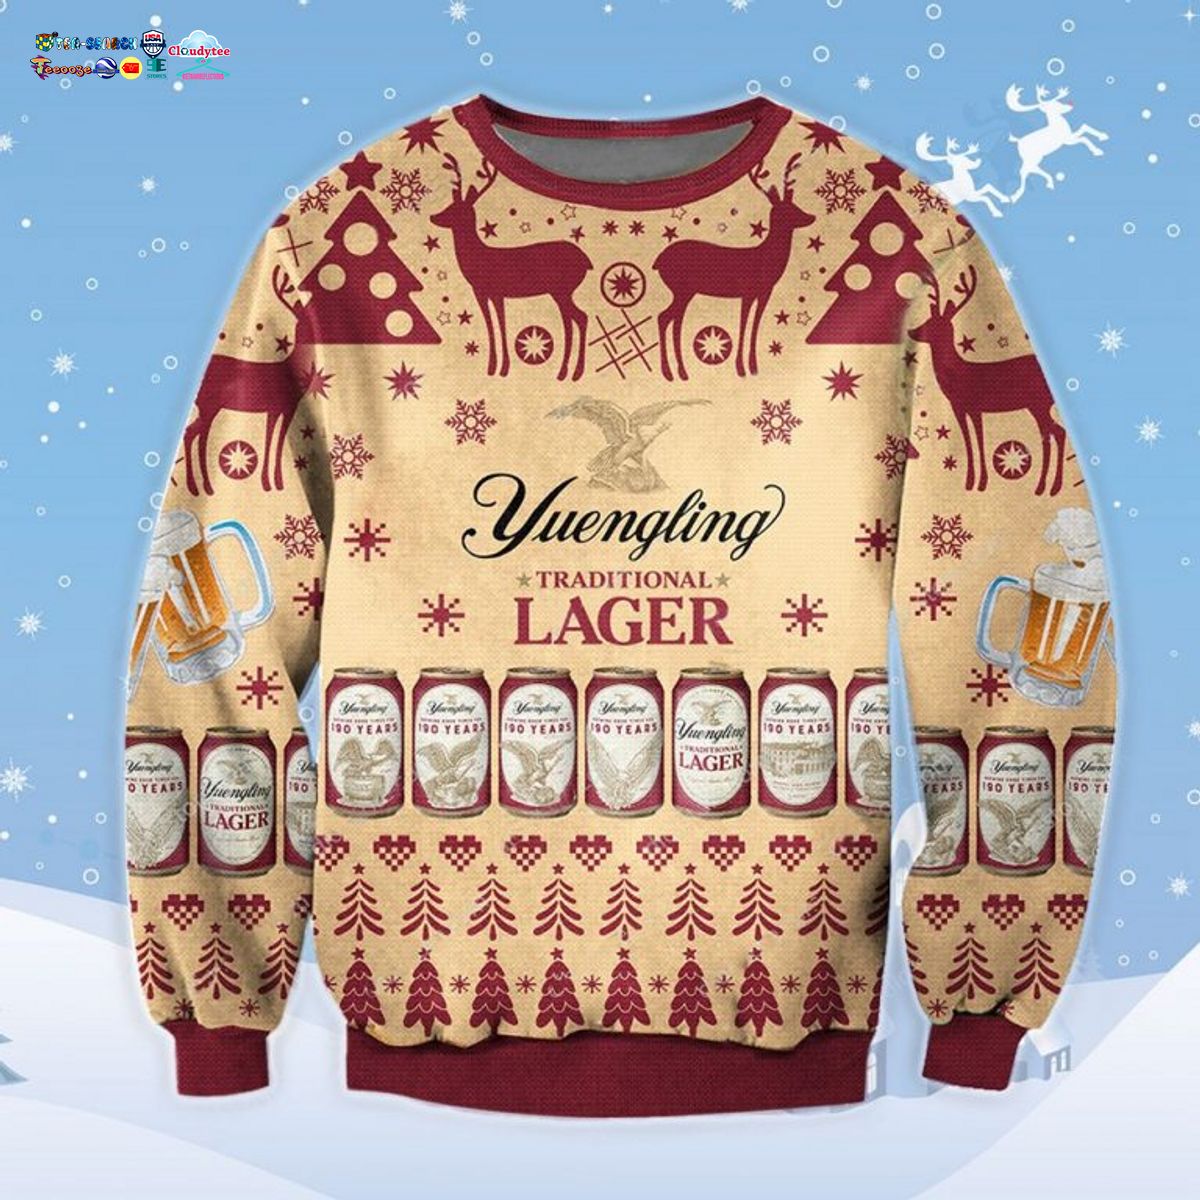 Yuengling Lager Ugly Christmas Sweater